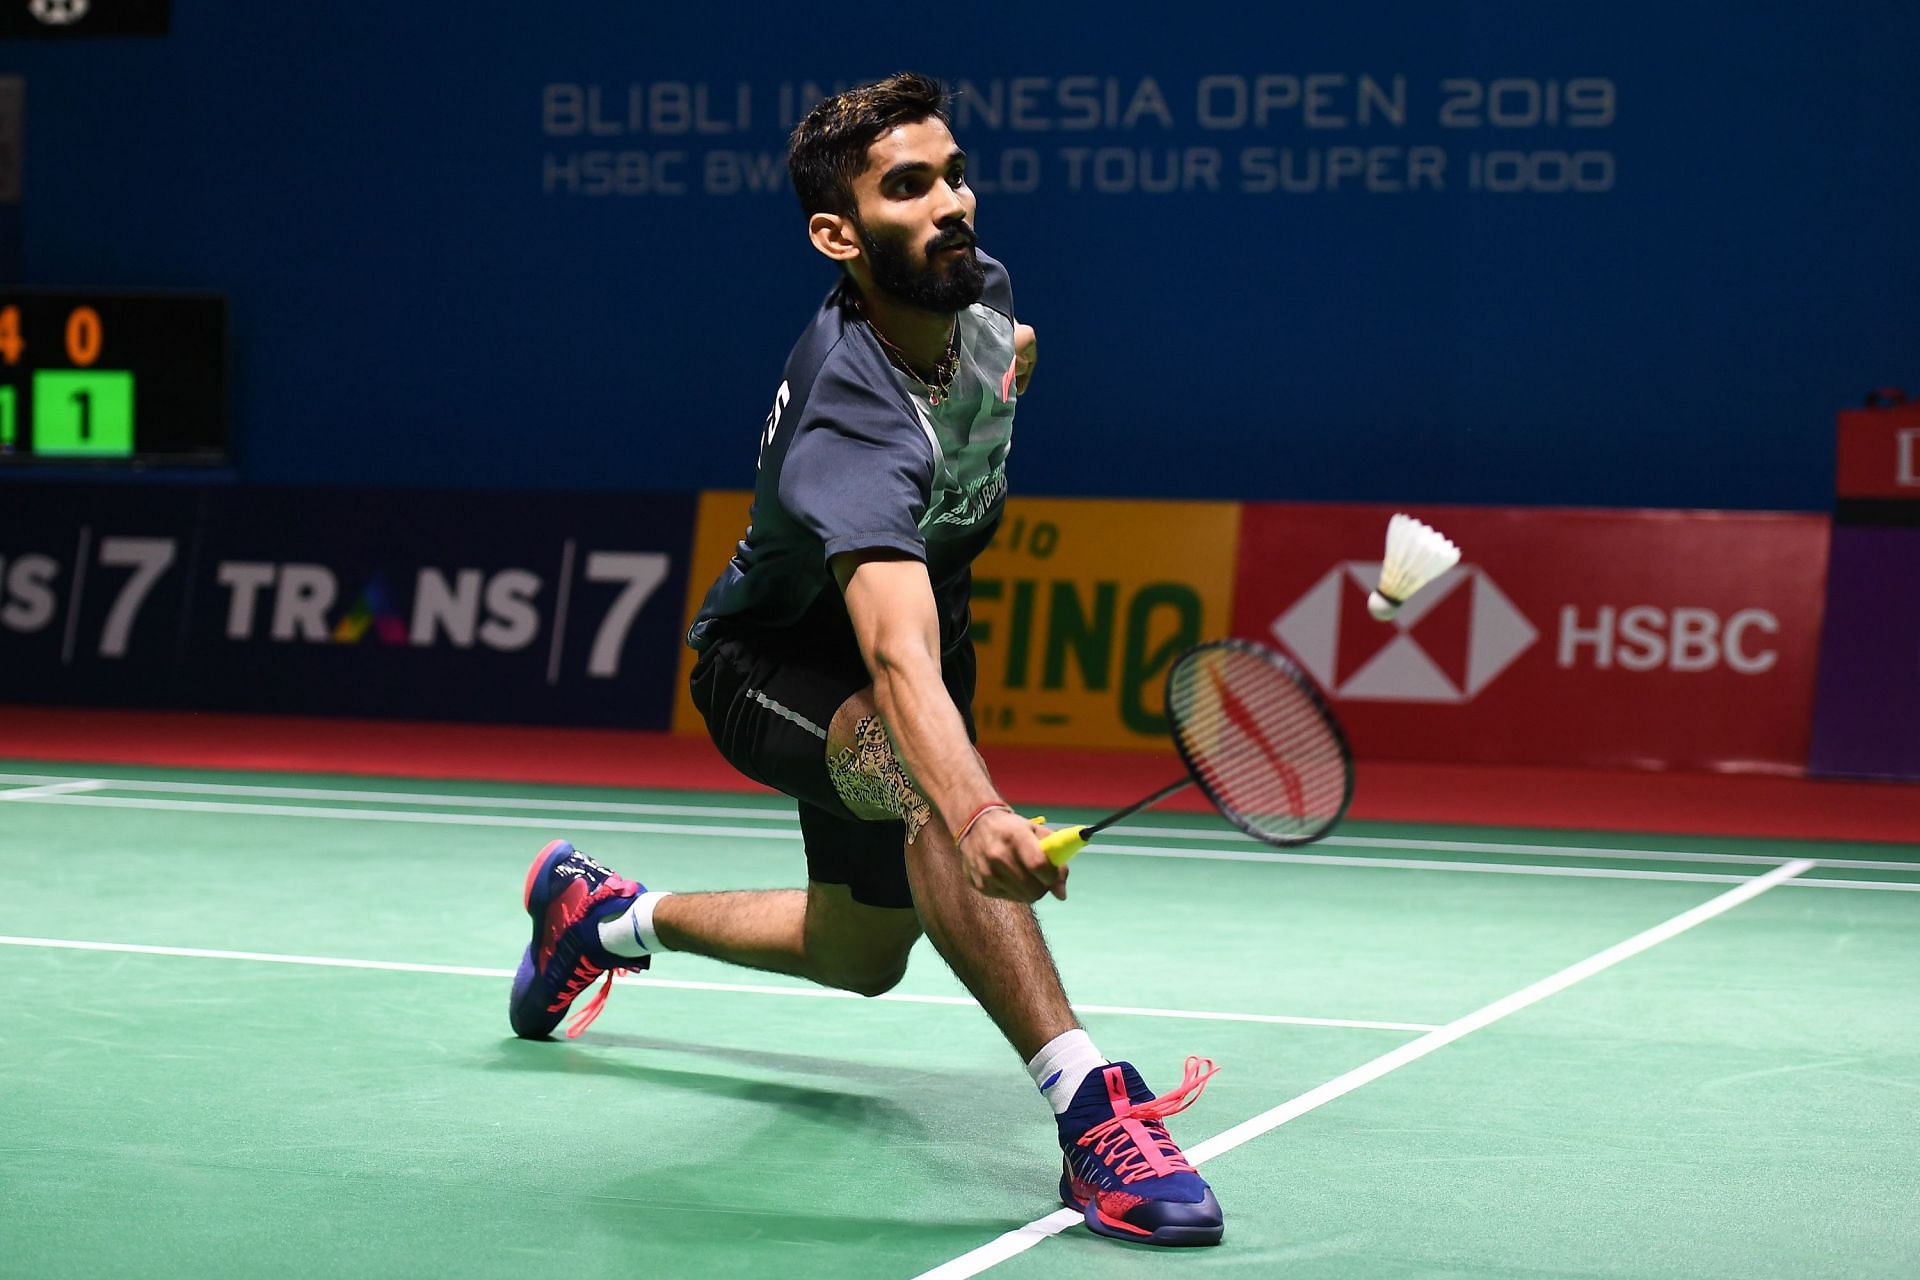 Kidambi Srikanth in action at an earlier edition of the Indonesia Open (Image courtesy: Getty Images)